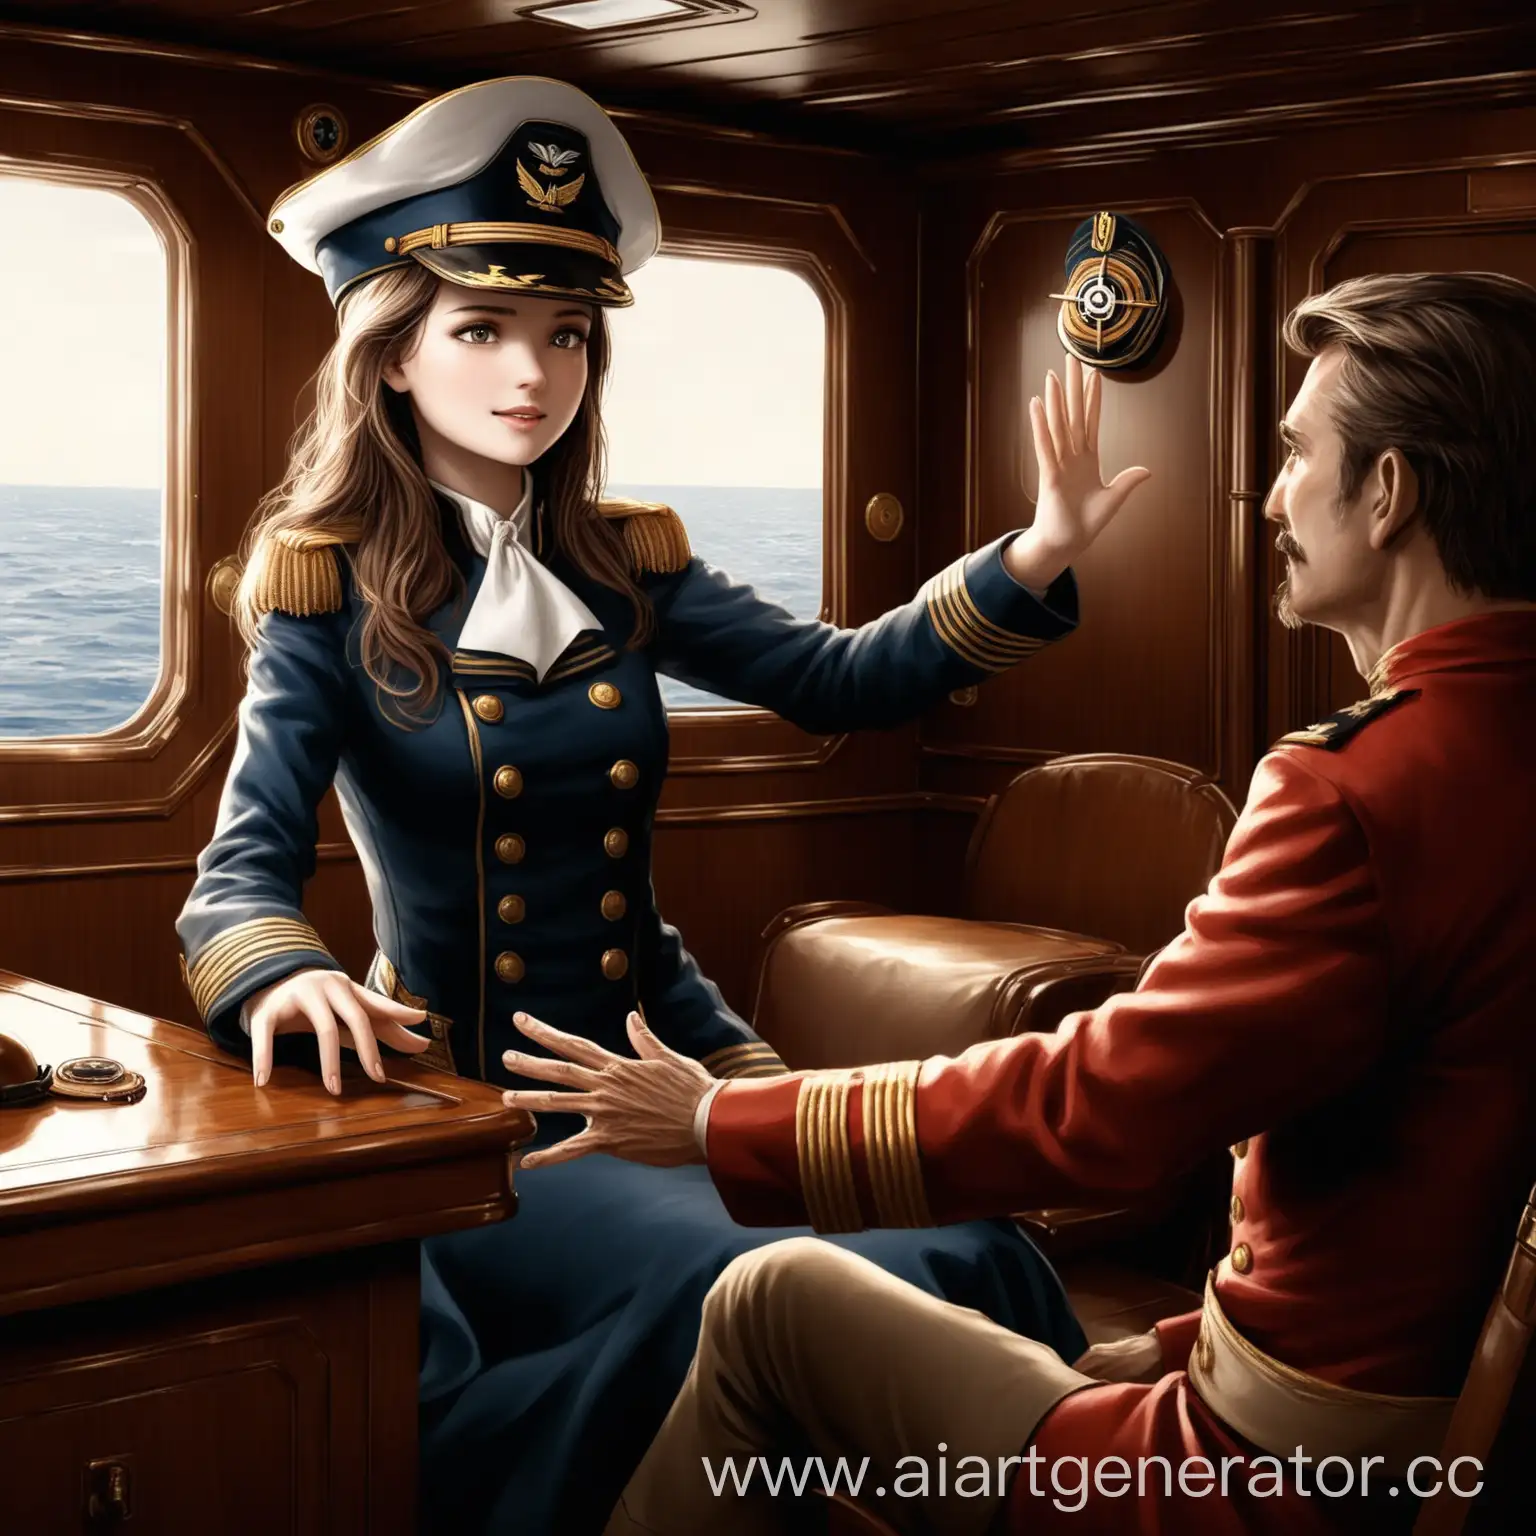 Captains-Cabin-Romance-Beautiful-Girl-and-Man-Reaching-Out